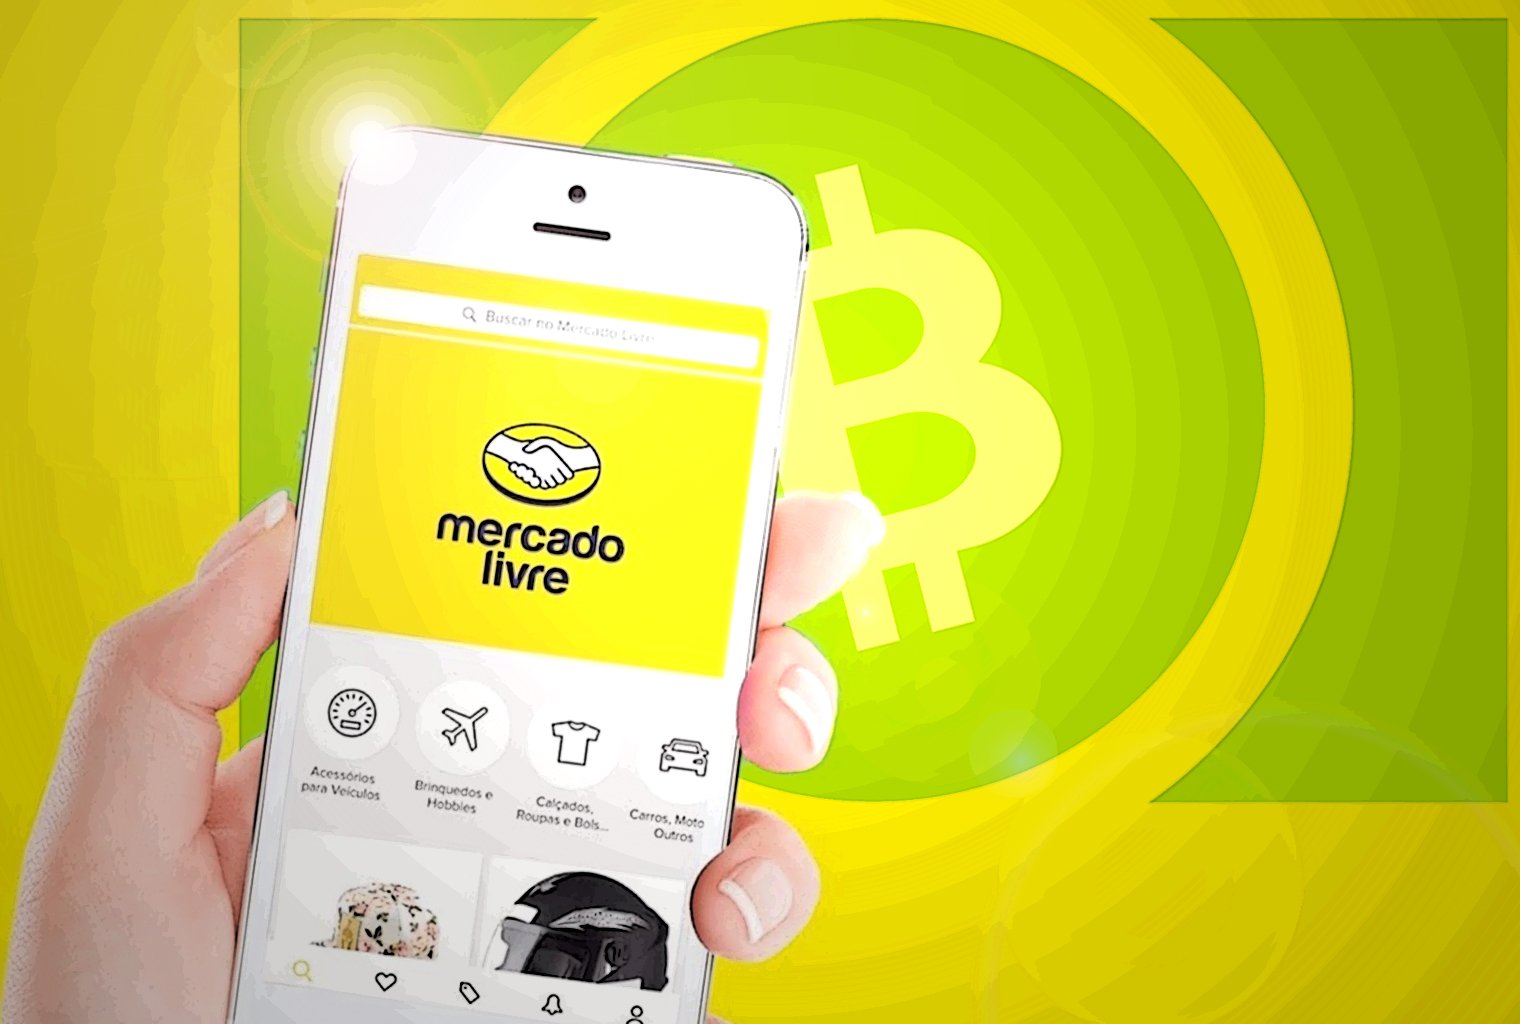 Latin American Payment App Mercado Pago Can Be Topped-Up With Crypto